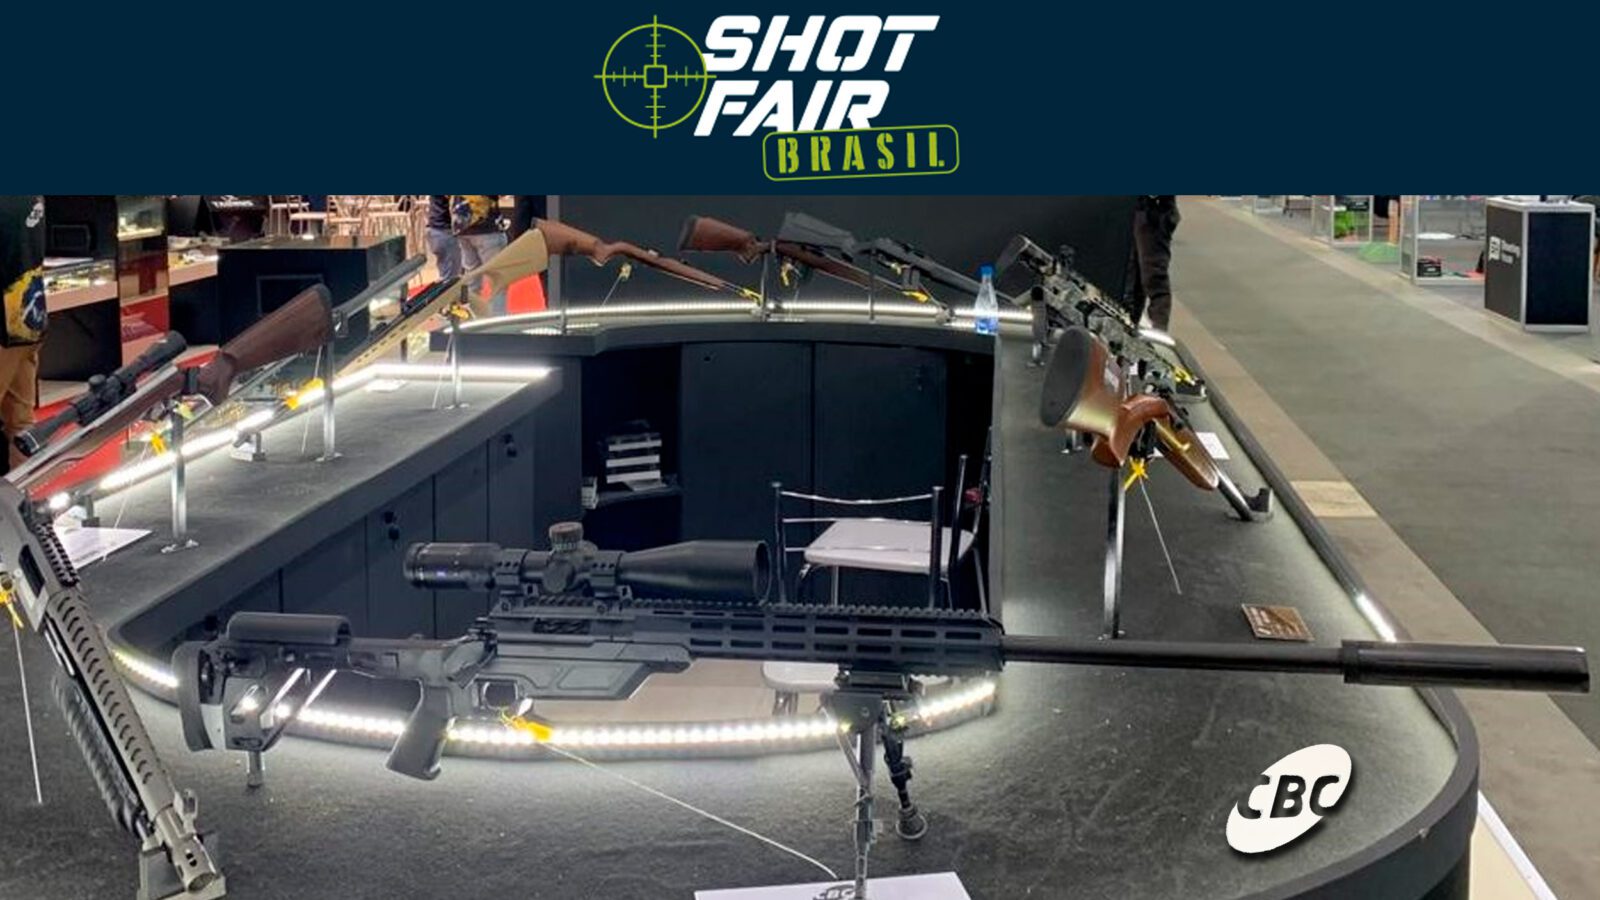 CBC presents several novelties at the 3rd edition of Shot Fair Brasil, the largest event in the sector in Latin America